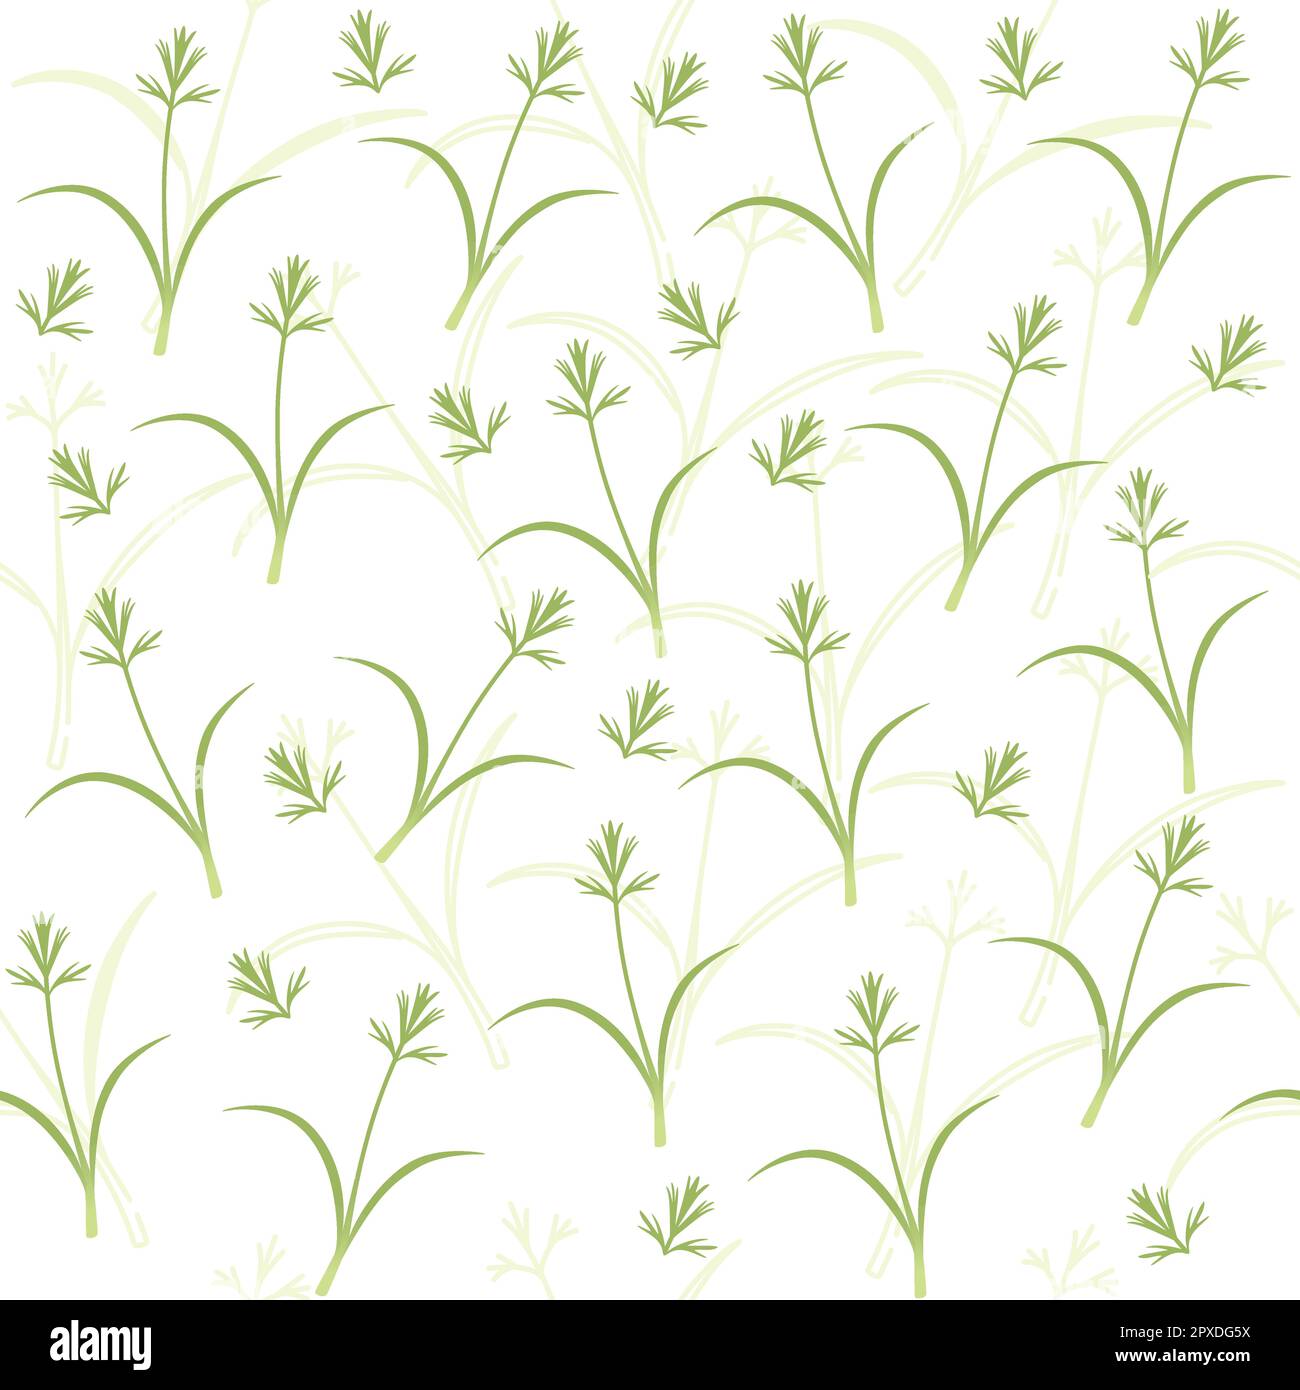 Seamless pattern microgreen superfood sprouts carrot healthy nutrition vector illustration on white background Stock Vector